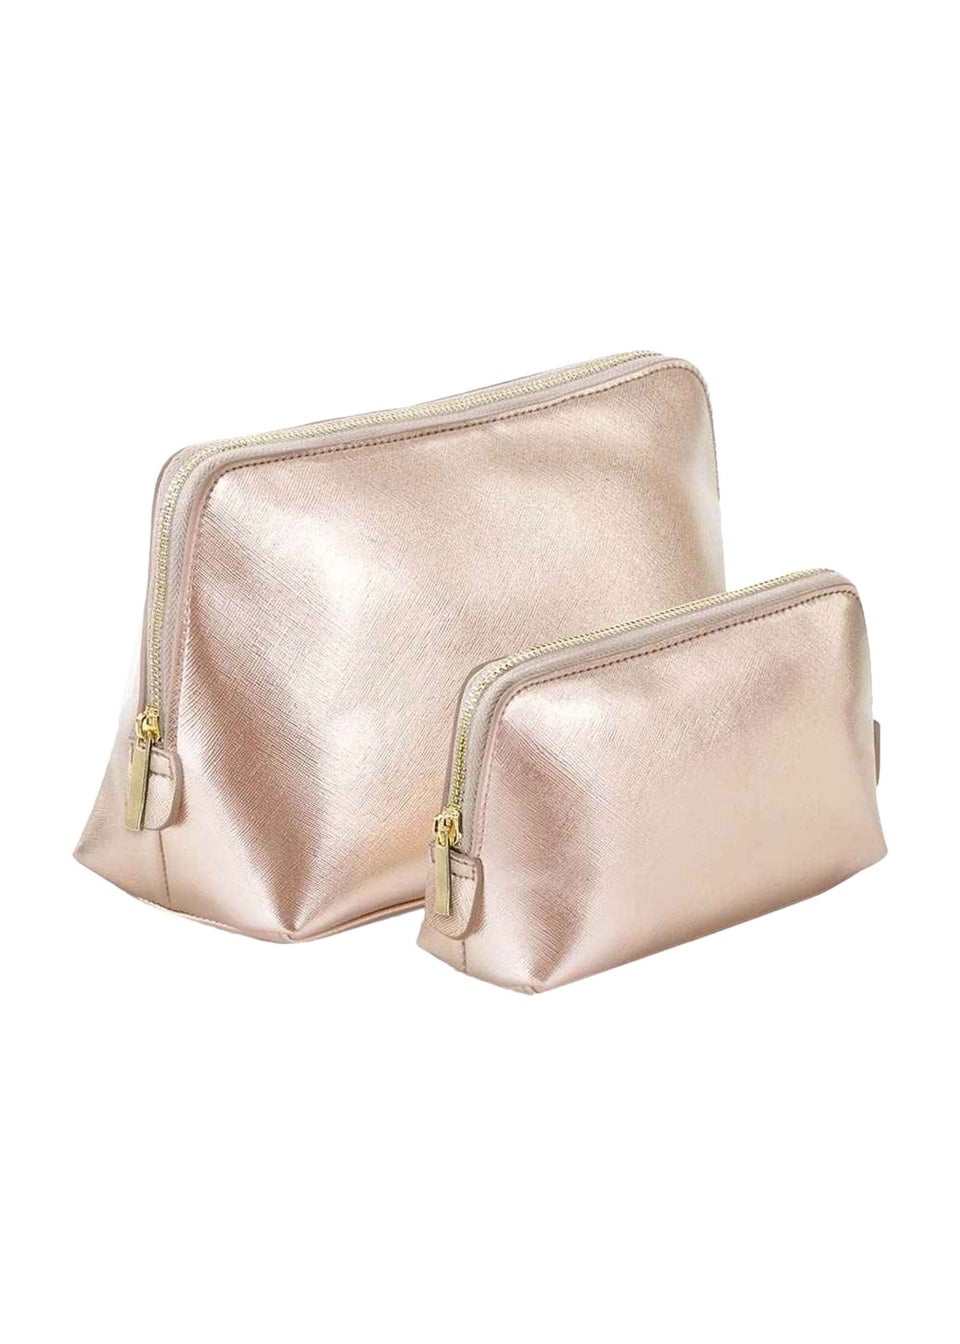 Bagbase Rose Gold Boutique Toiletry Bag